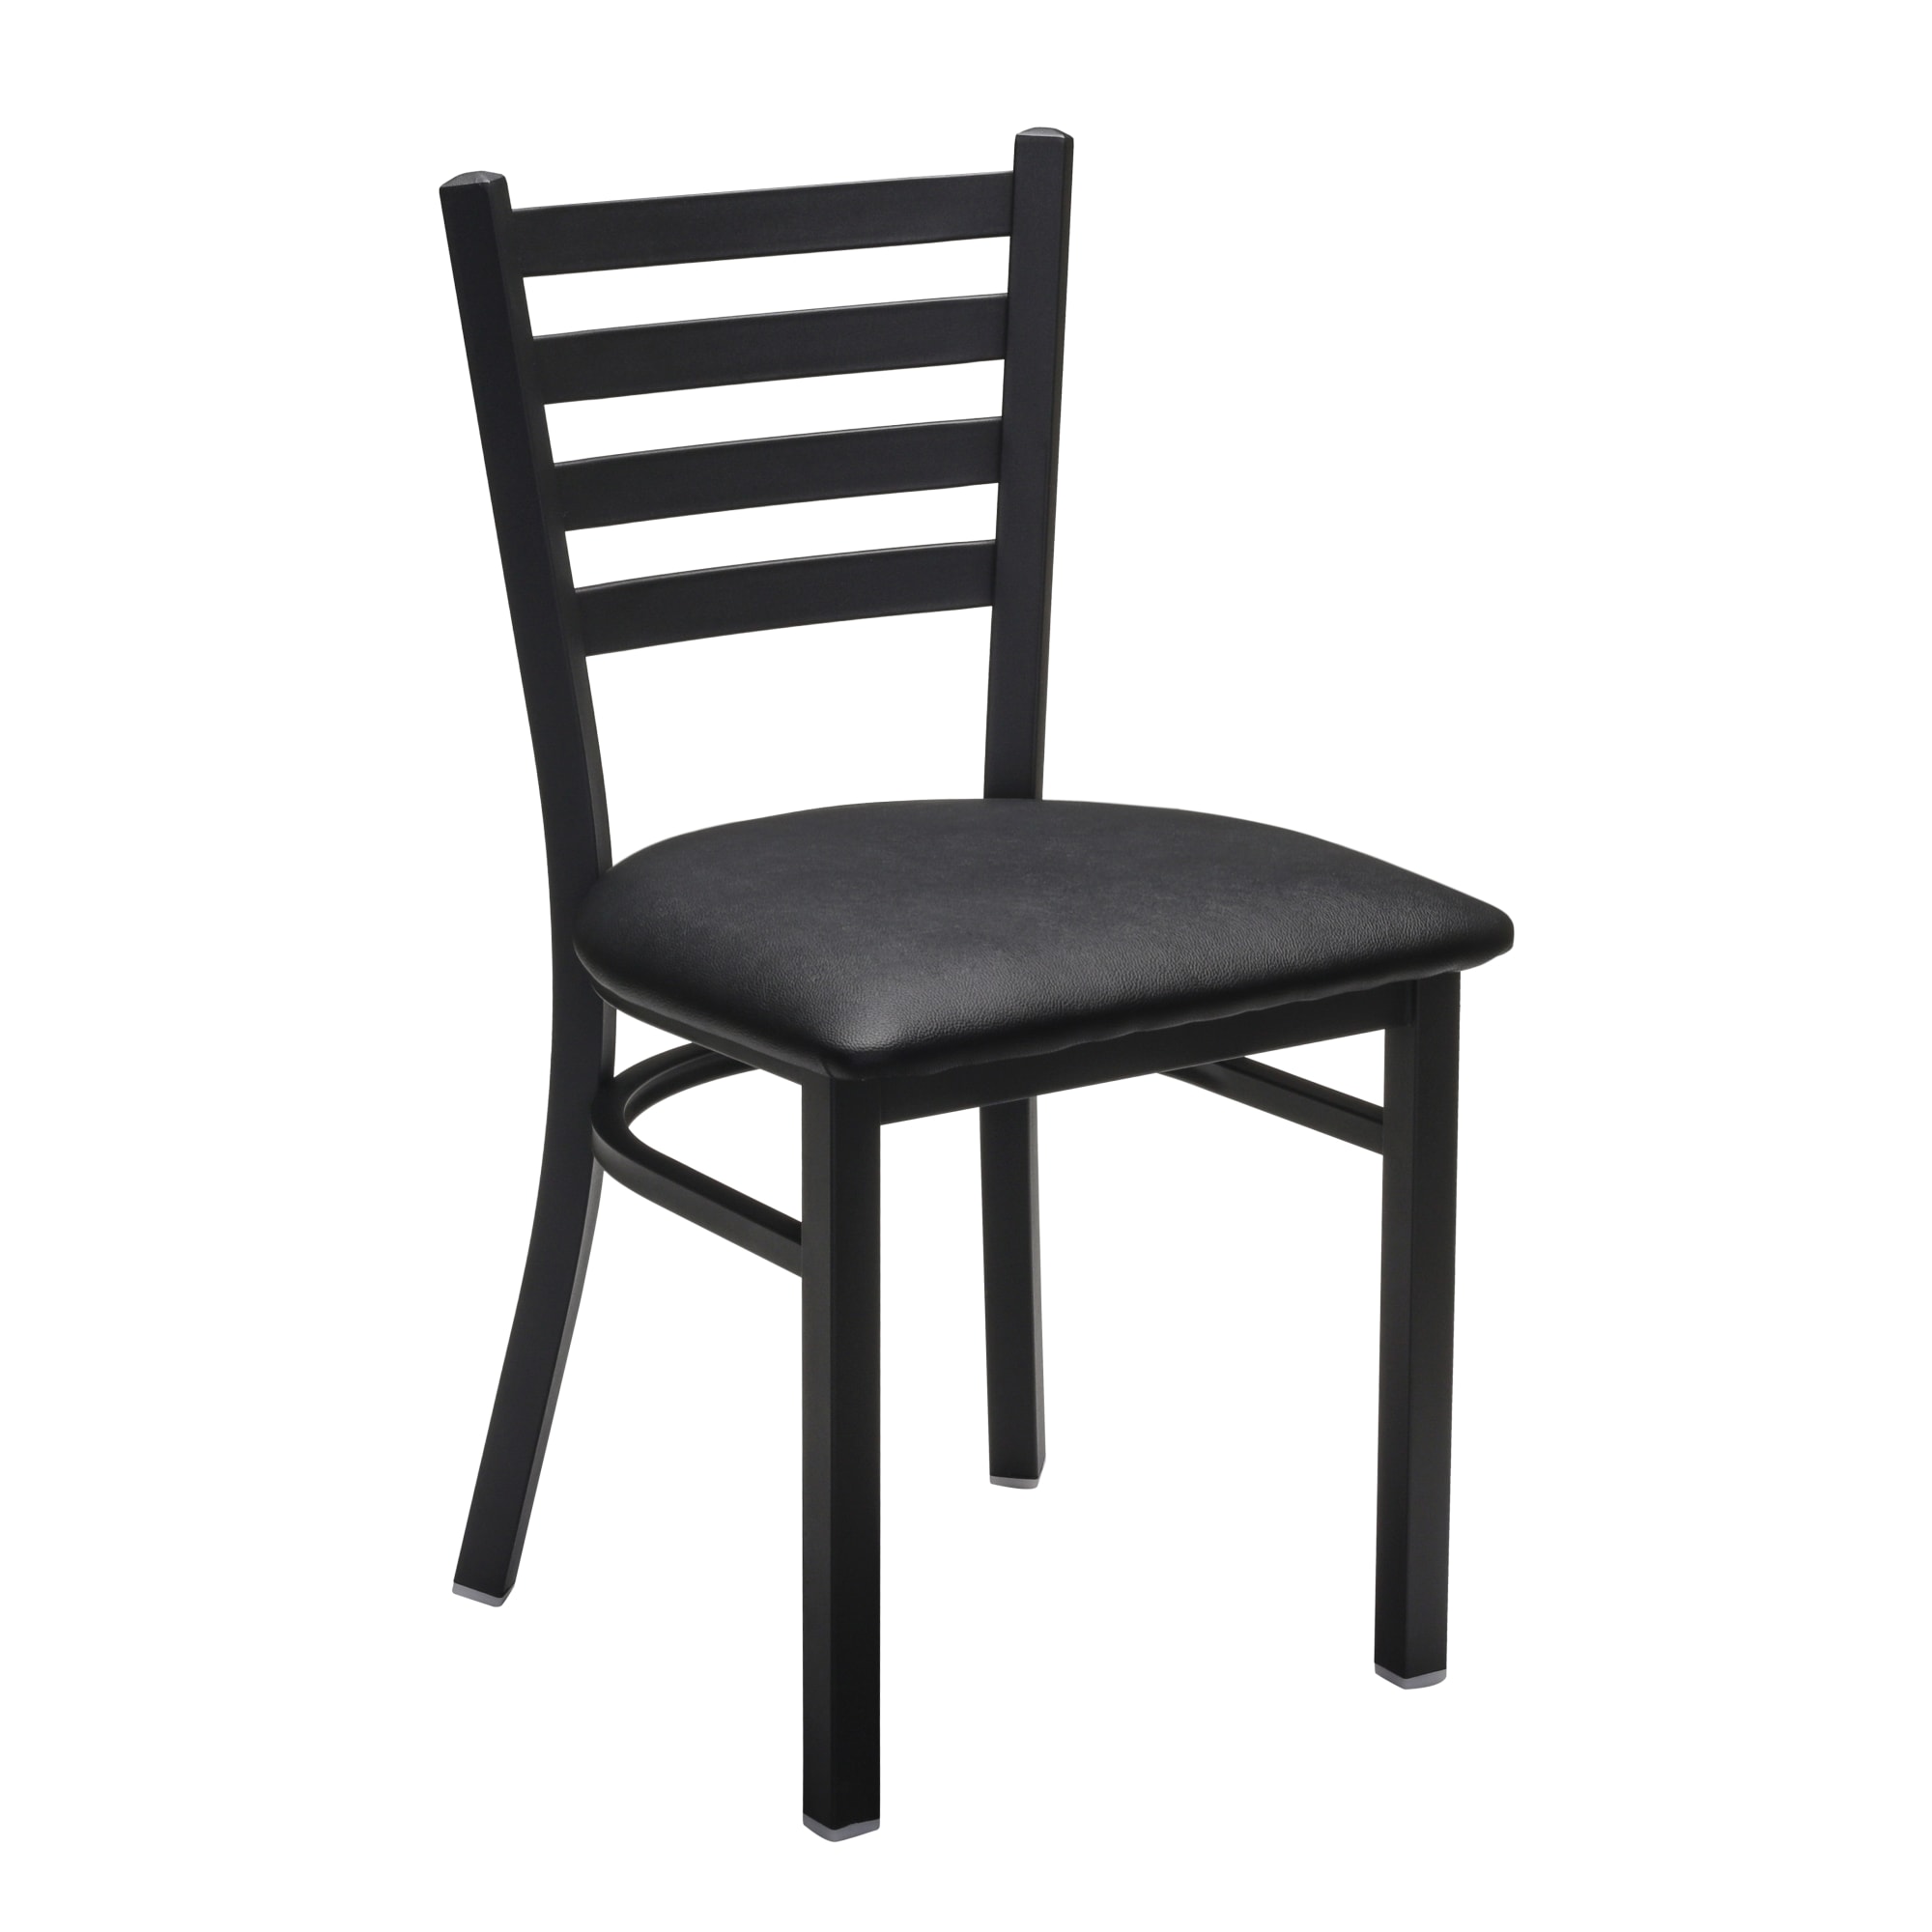 Commercial Quality Metal Restaurant Chair Ladder Back Black Metal Dining Chair With Vinyl Padded Seat